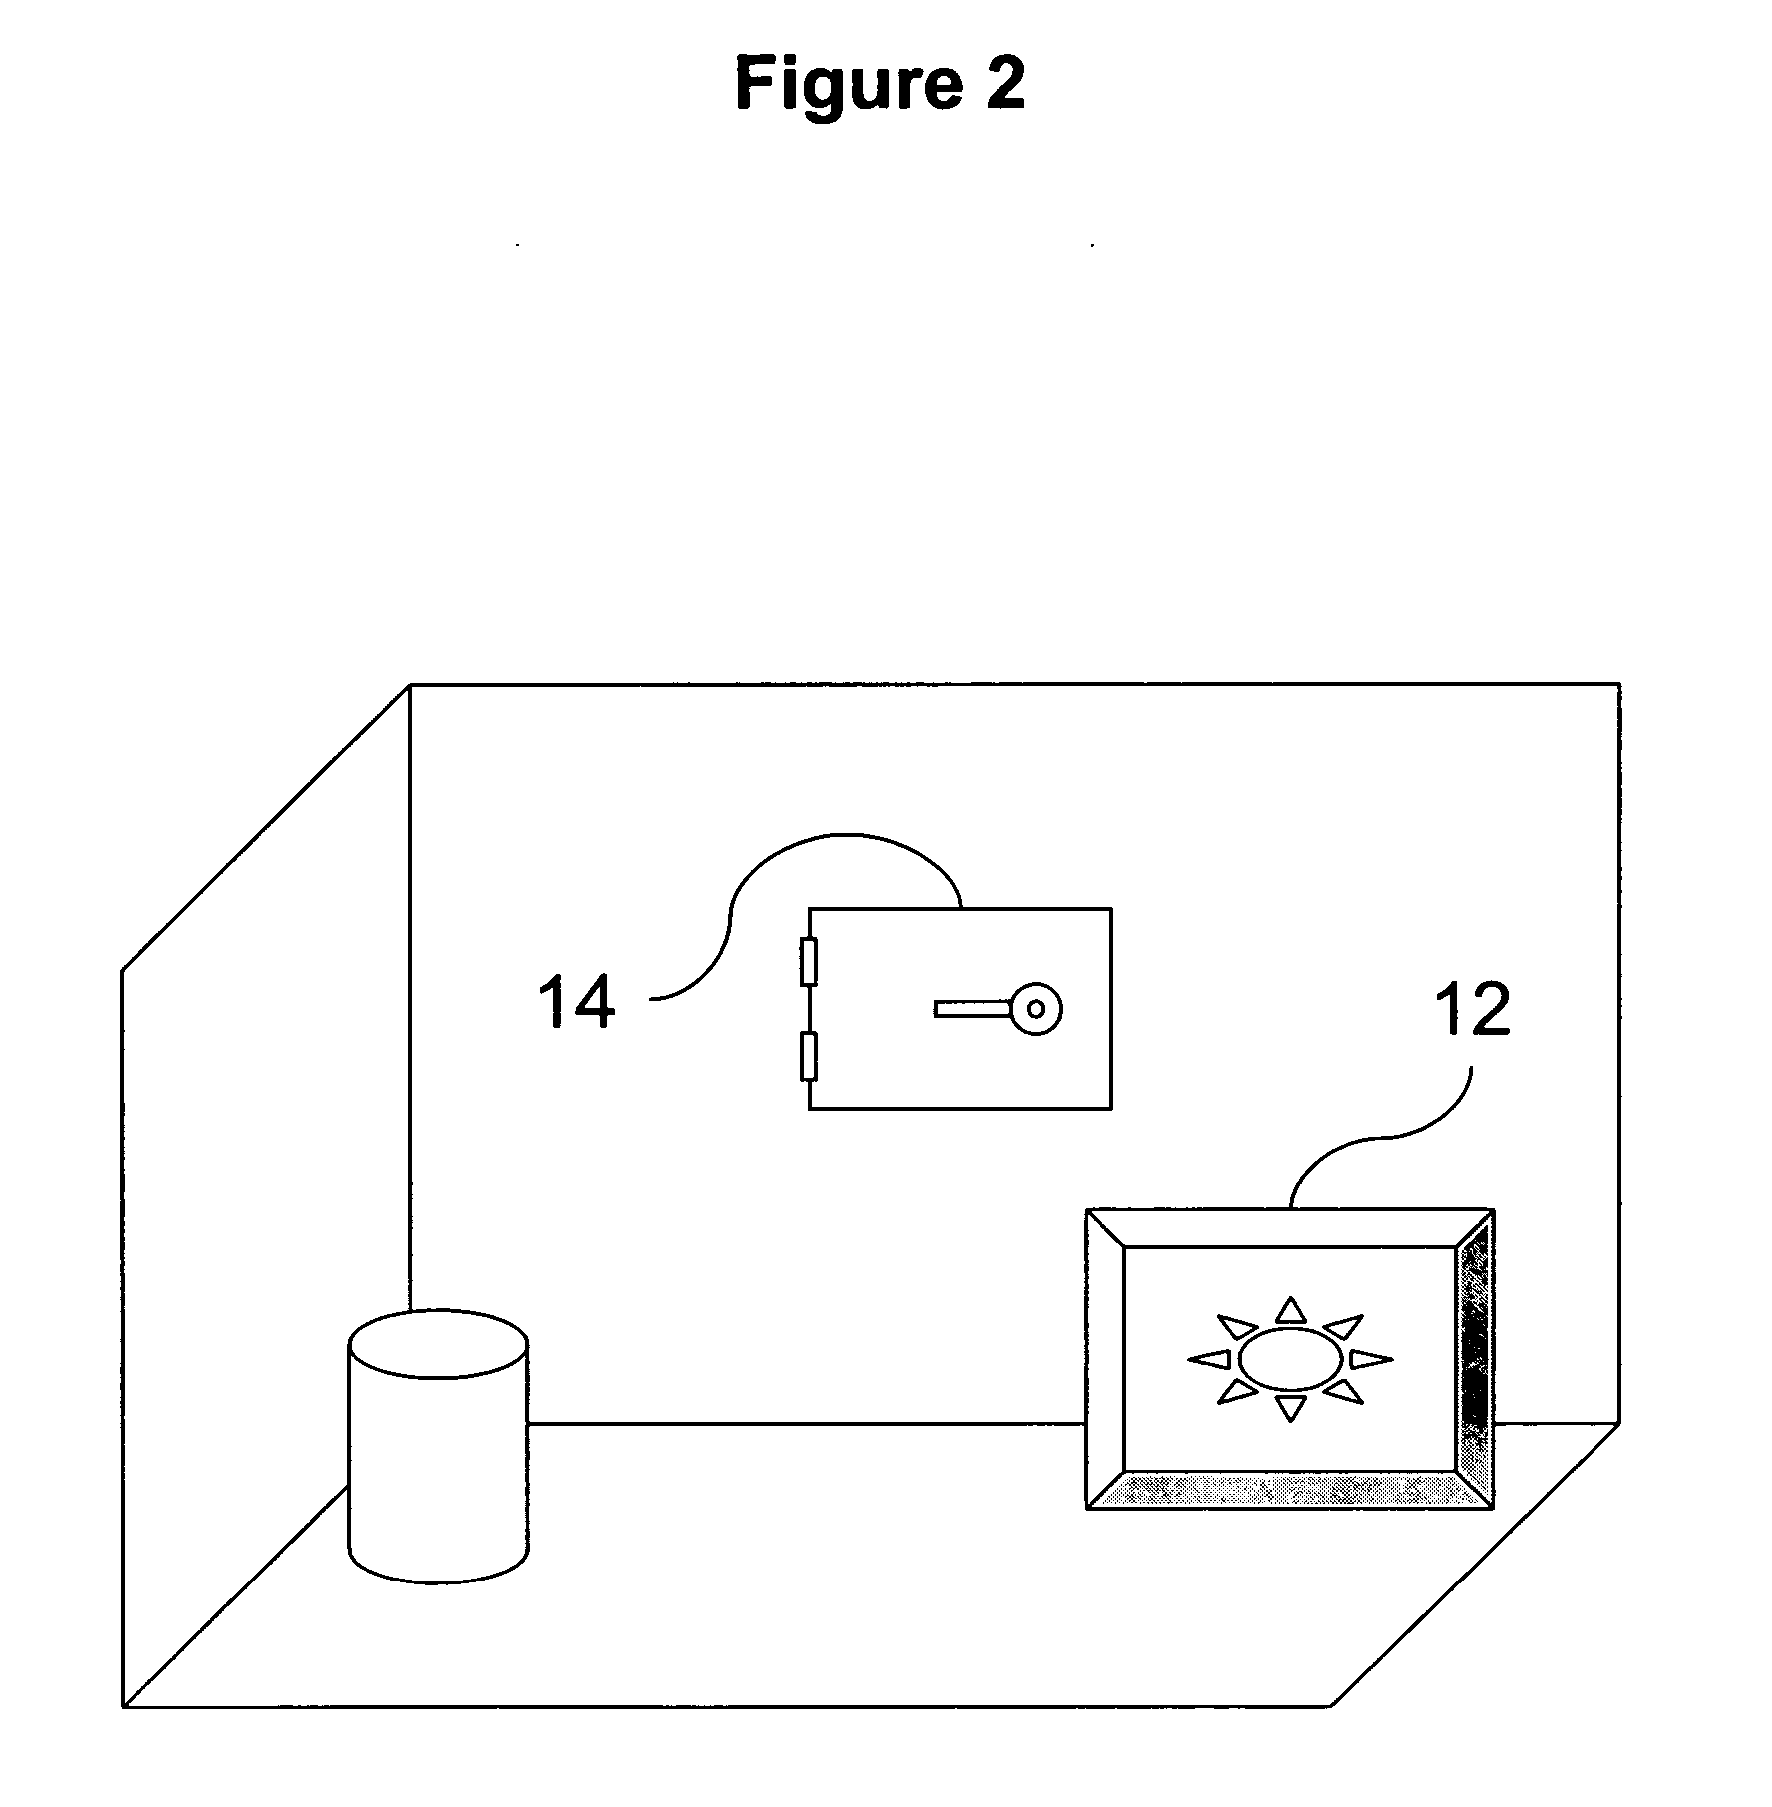 Concealing a network connected device